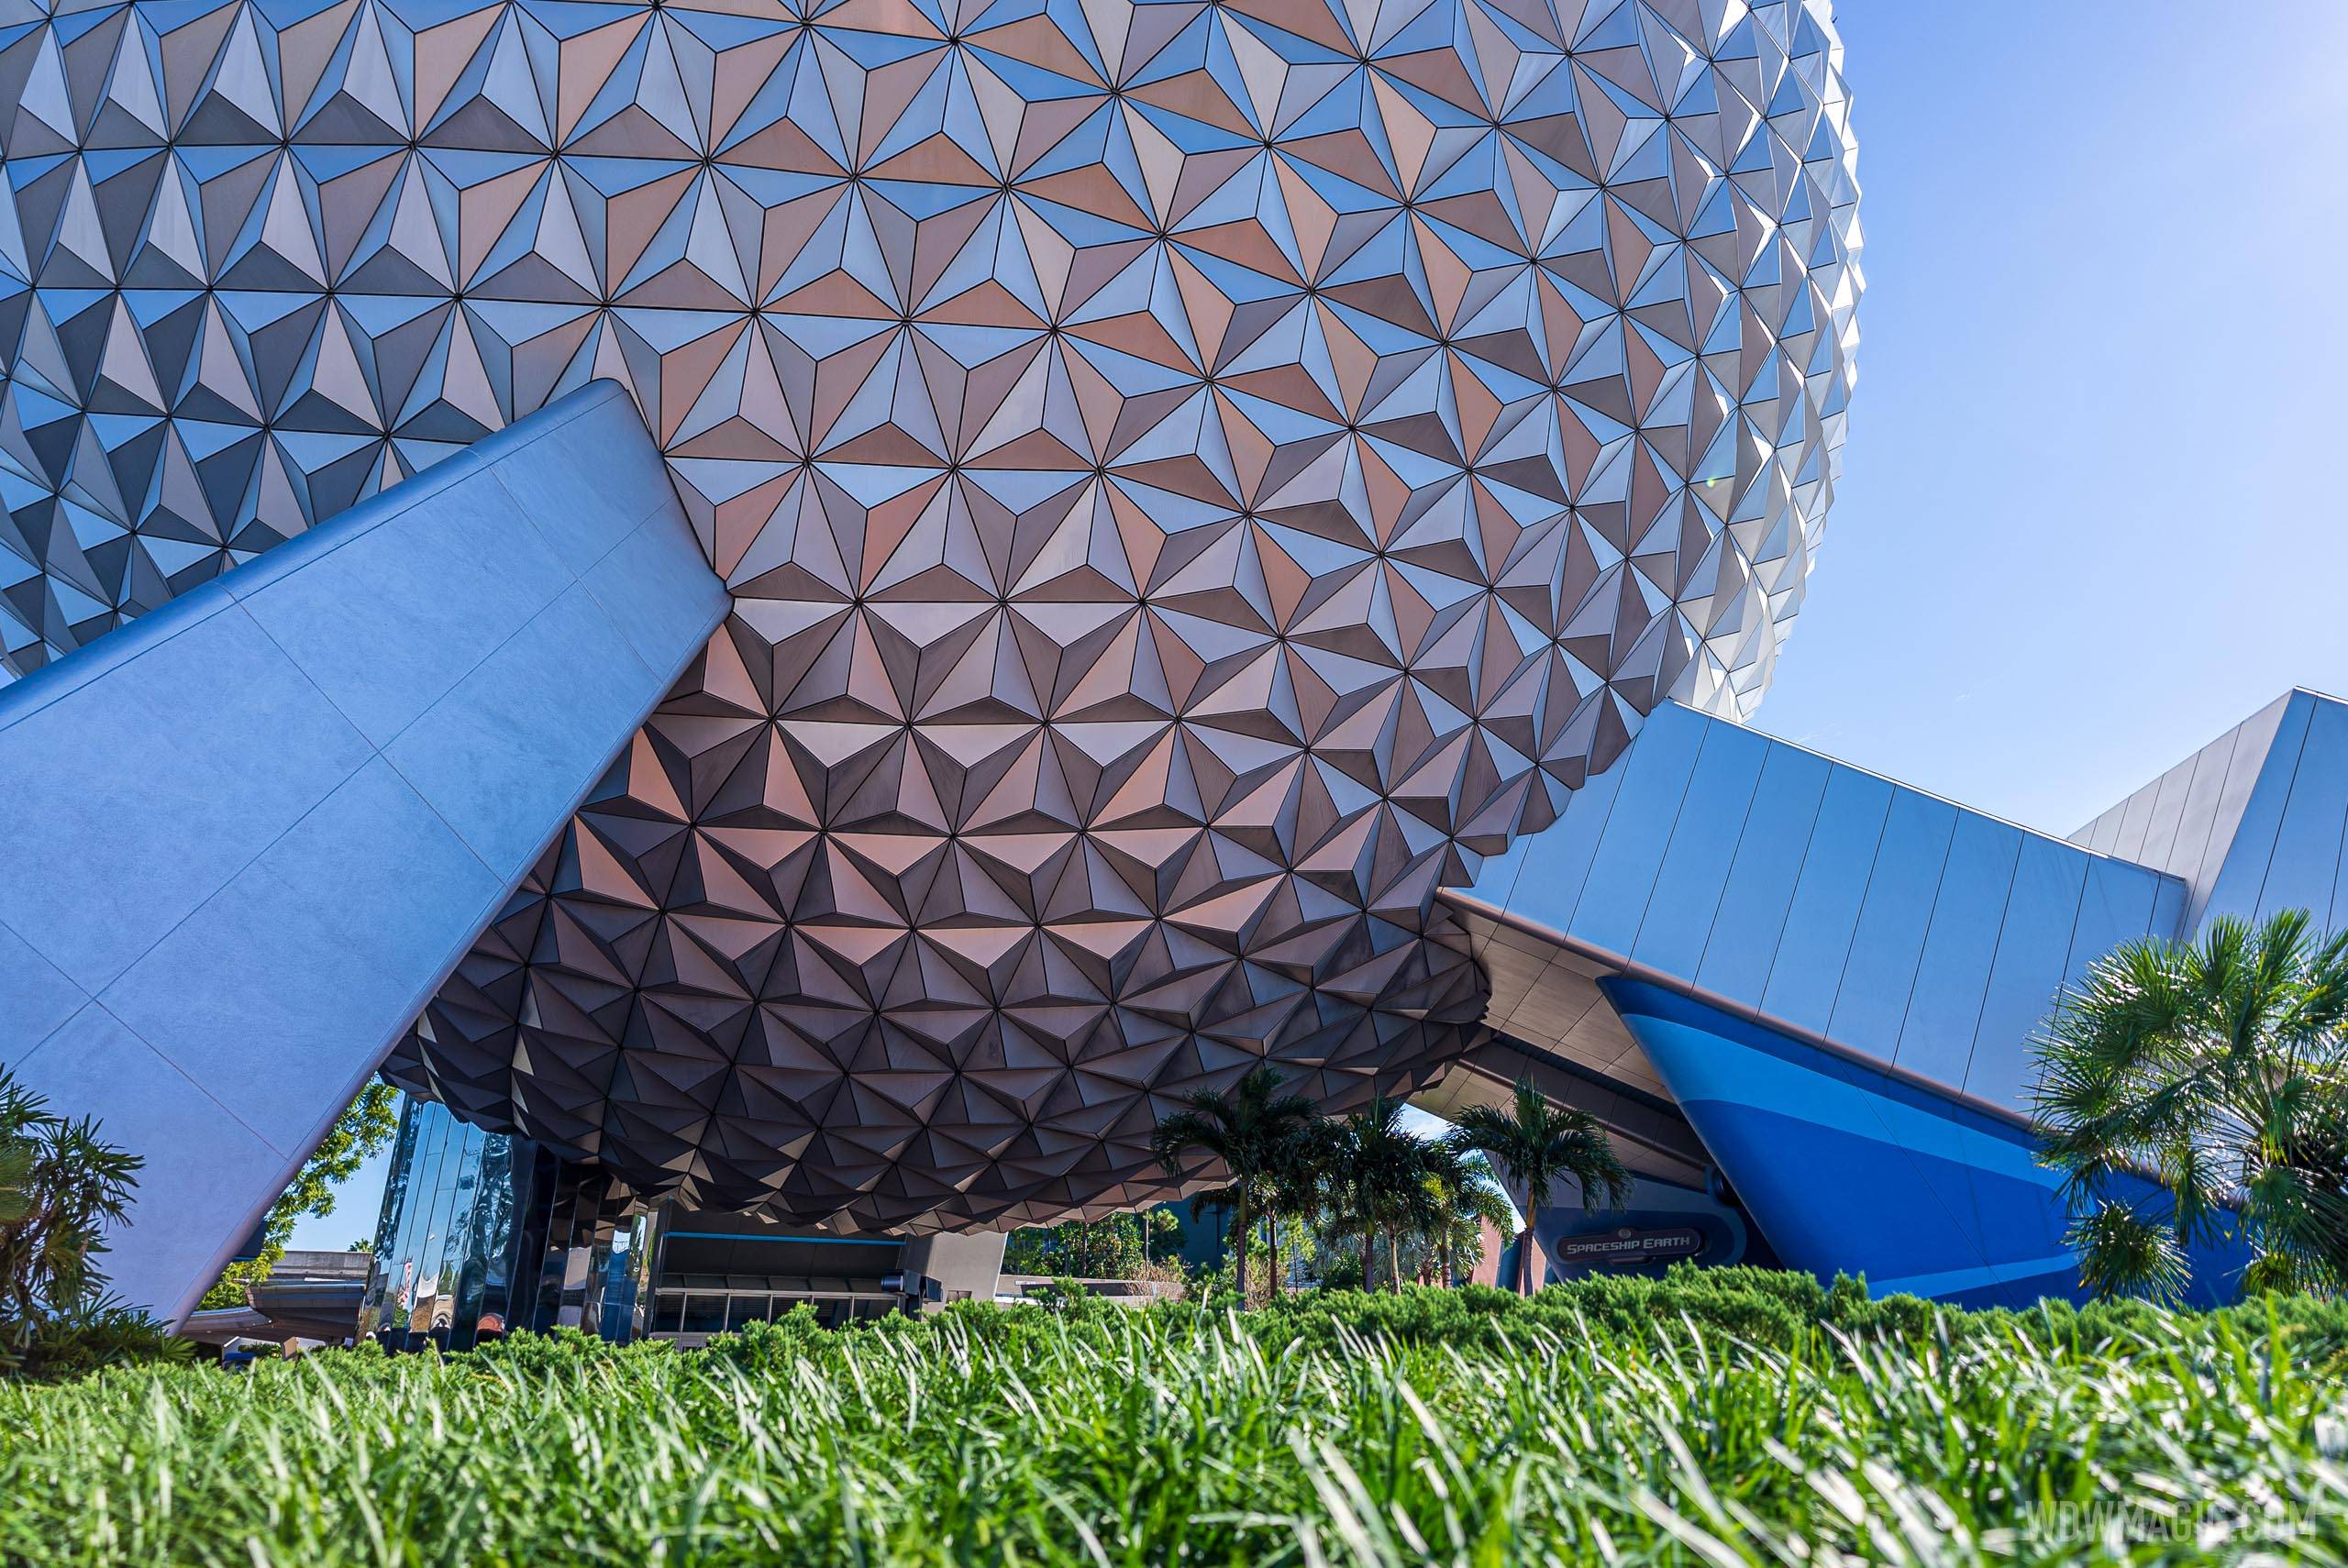 Spaceship Earth closing early each day next week for planned maintenance